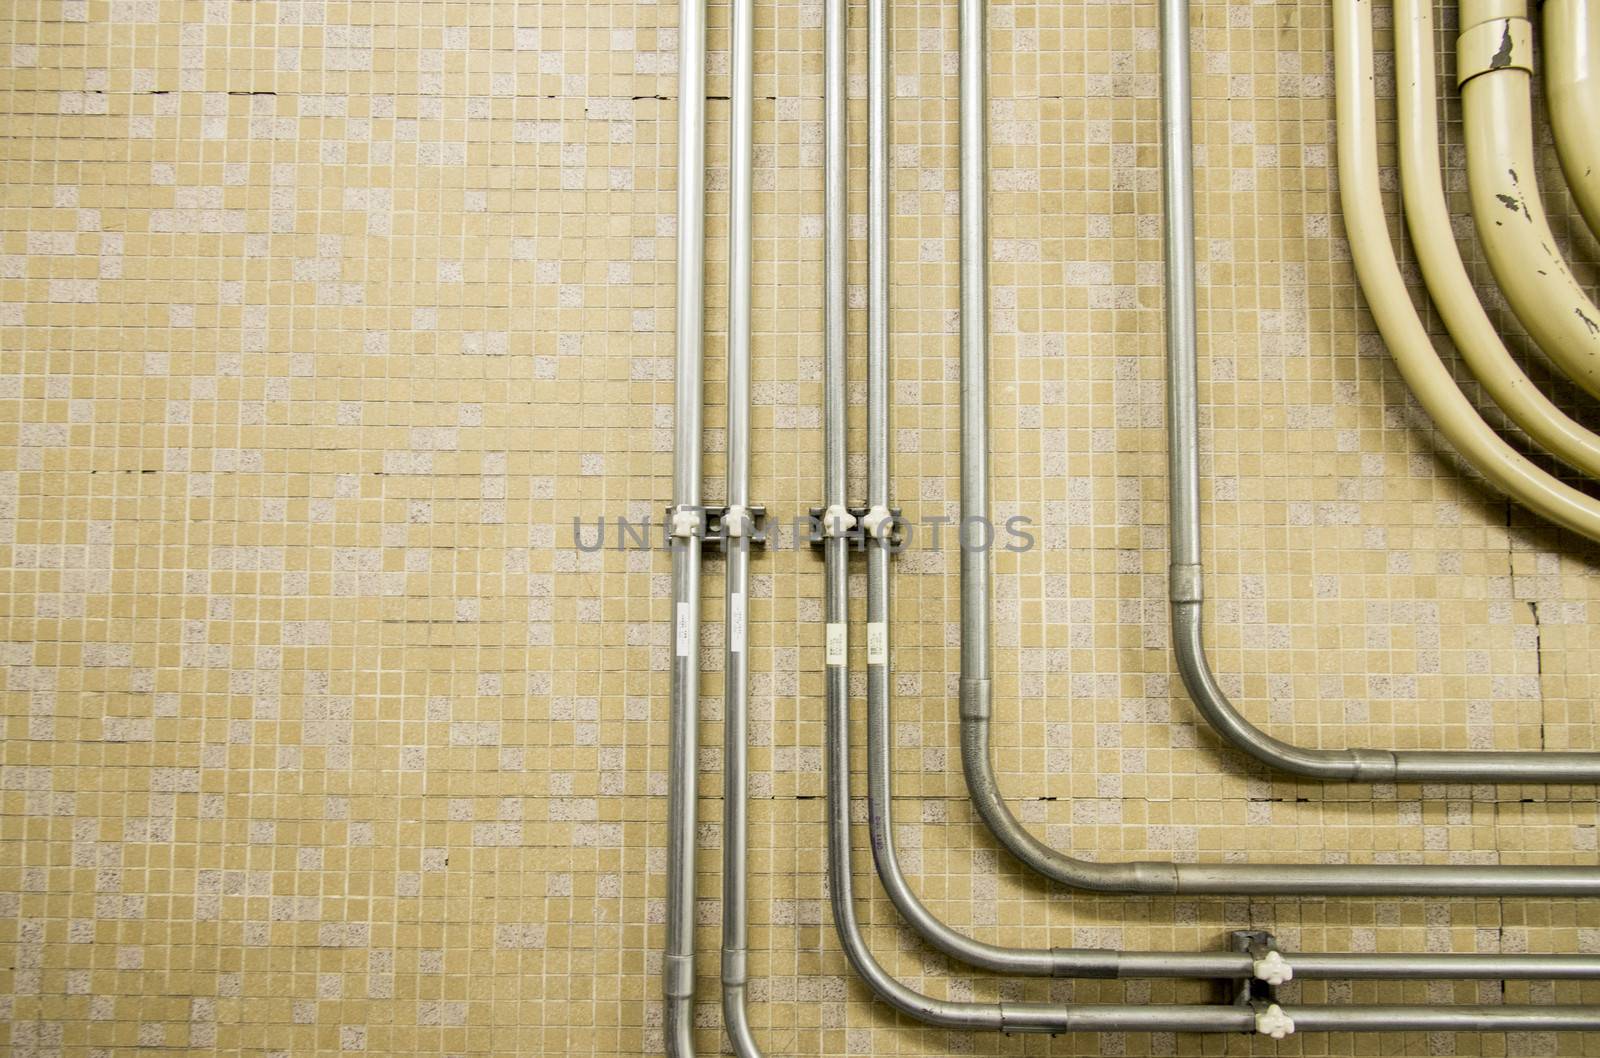 Piping connector on the wall3